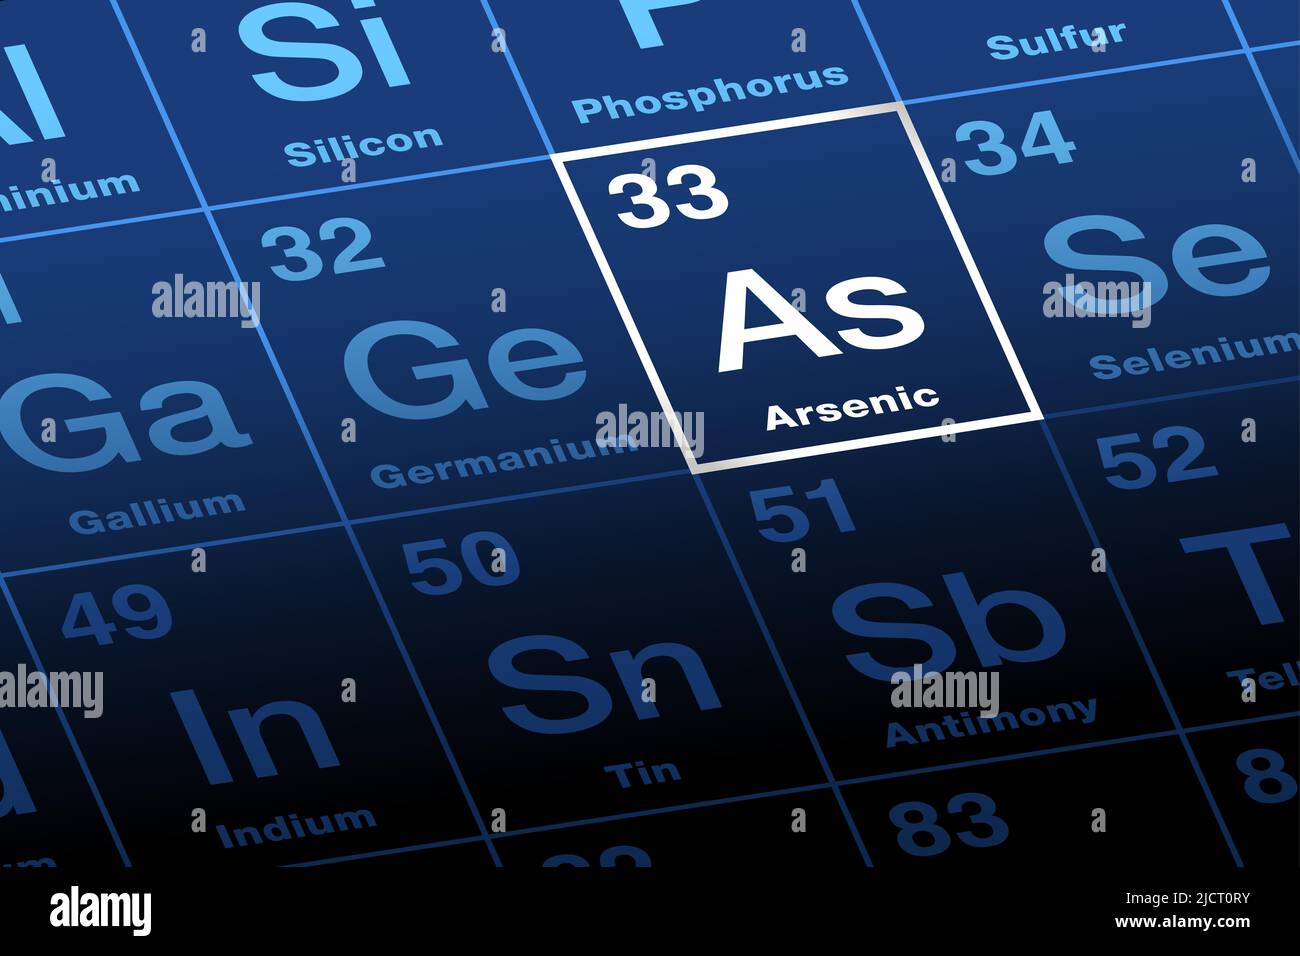 Arsenic on periodic table of the elements. Metalloid chemical element with Symbol As and atomic number 33. Its compounds are especially potent poisons. Stock Photo